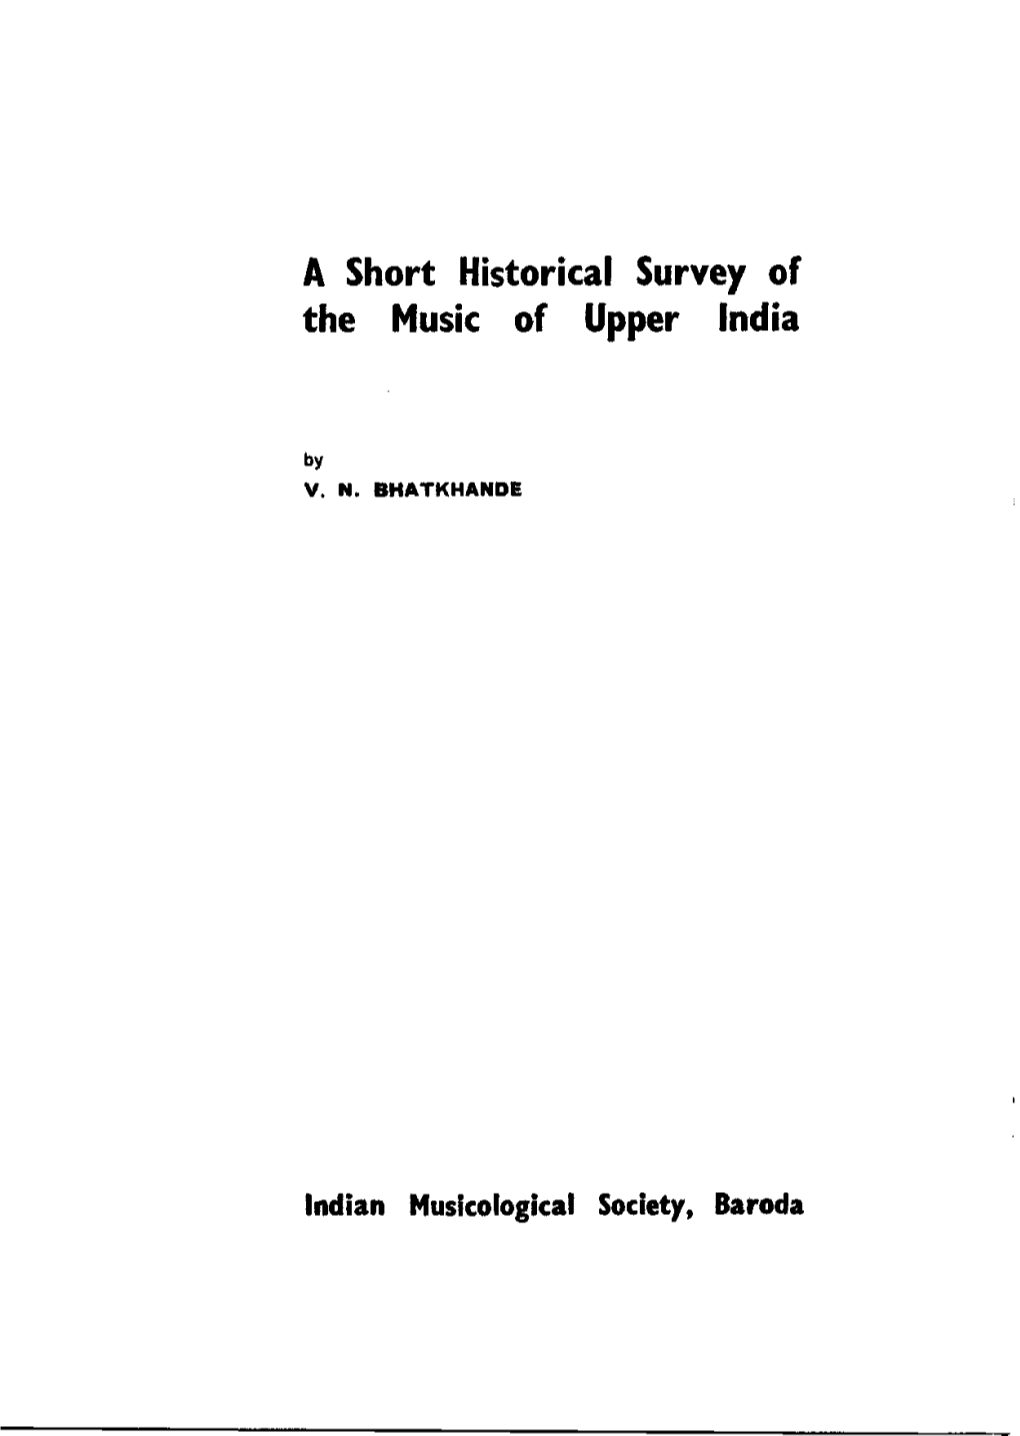 A Short Historical Survey of the Music of Upper India